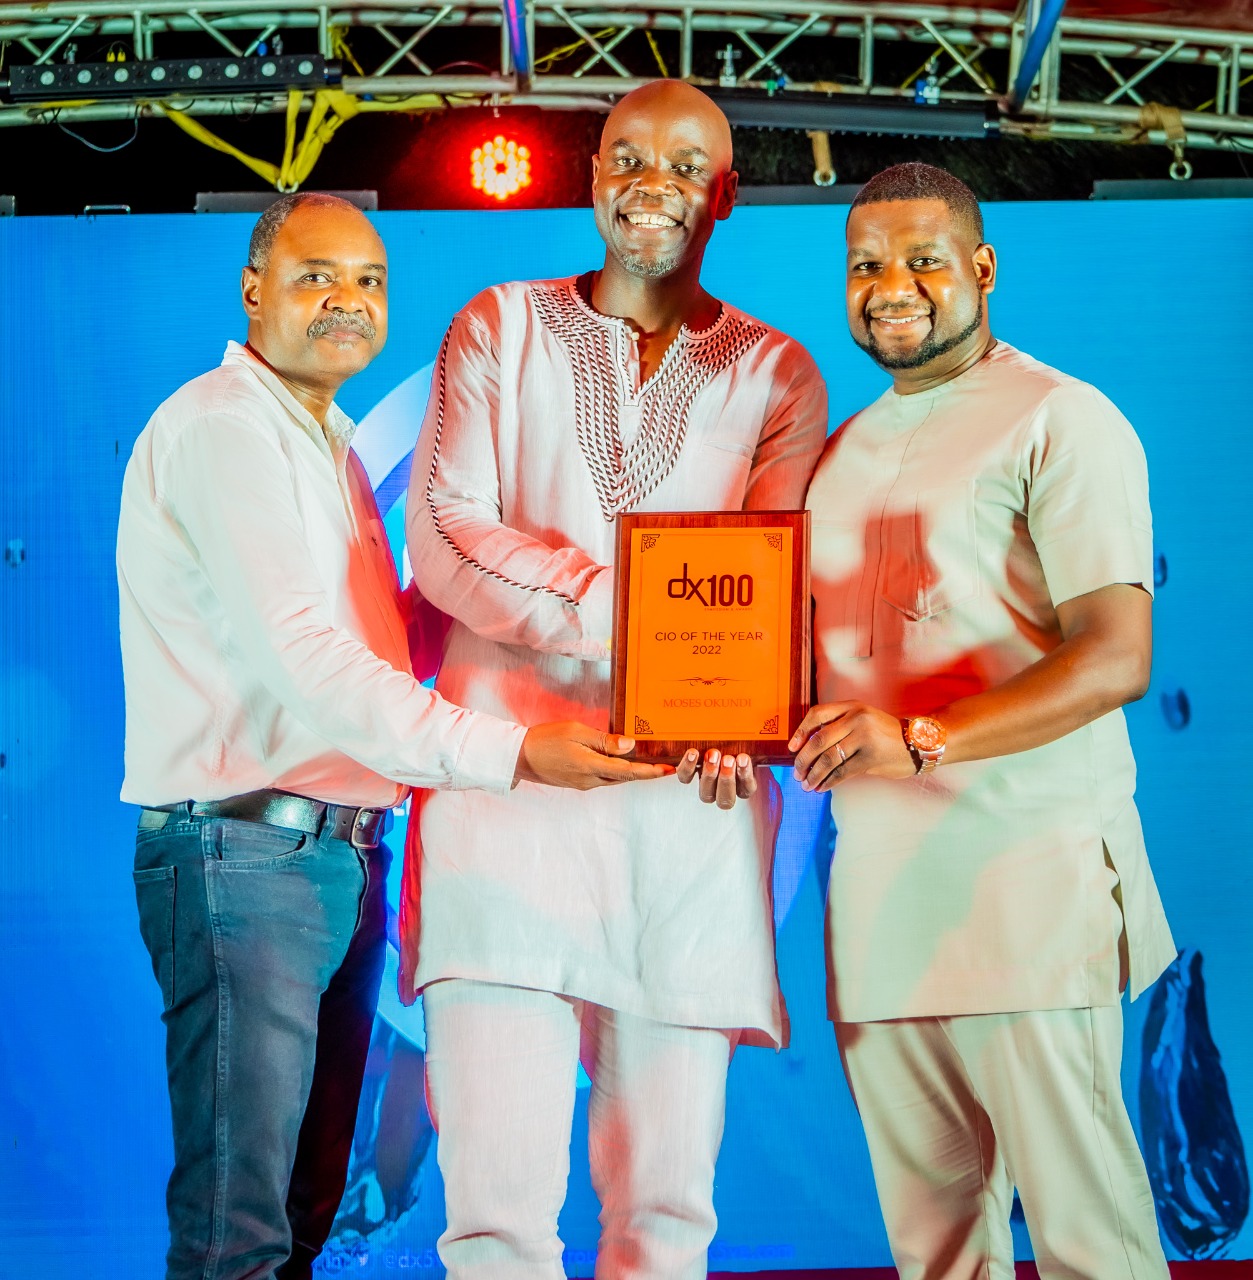 Moses Okundi Is The CIO Of The Year